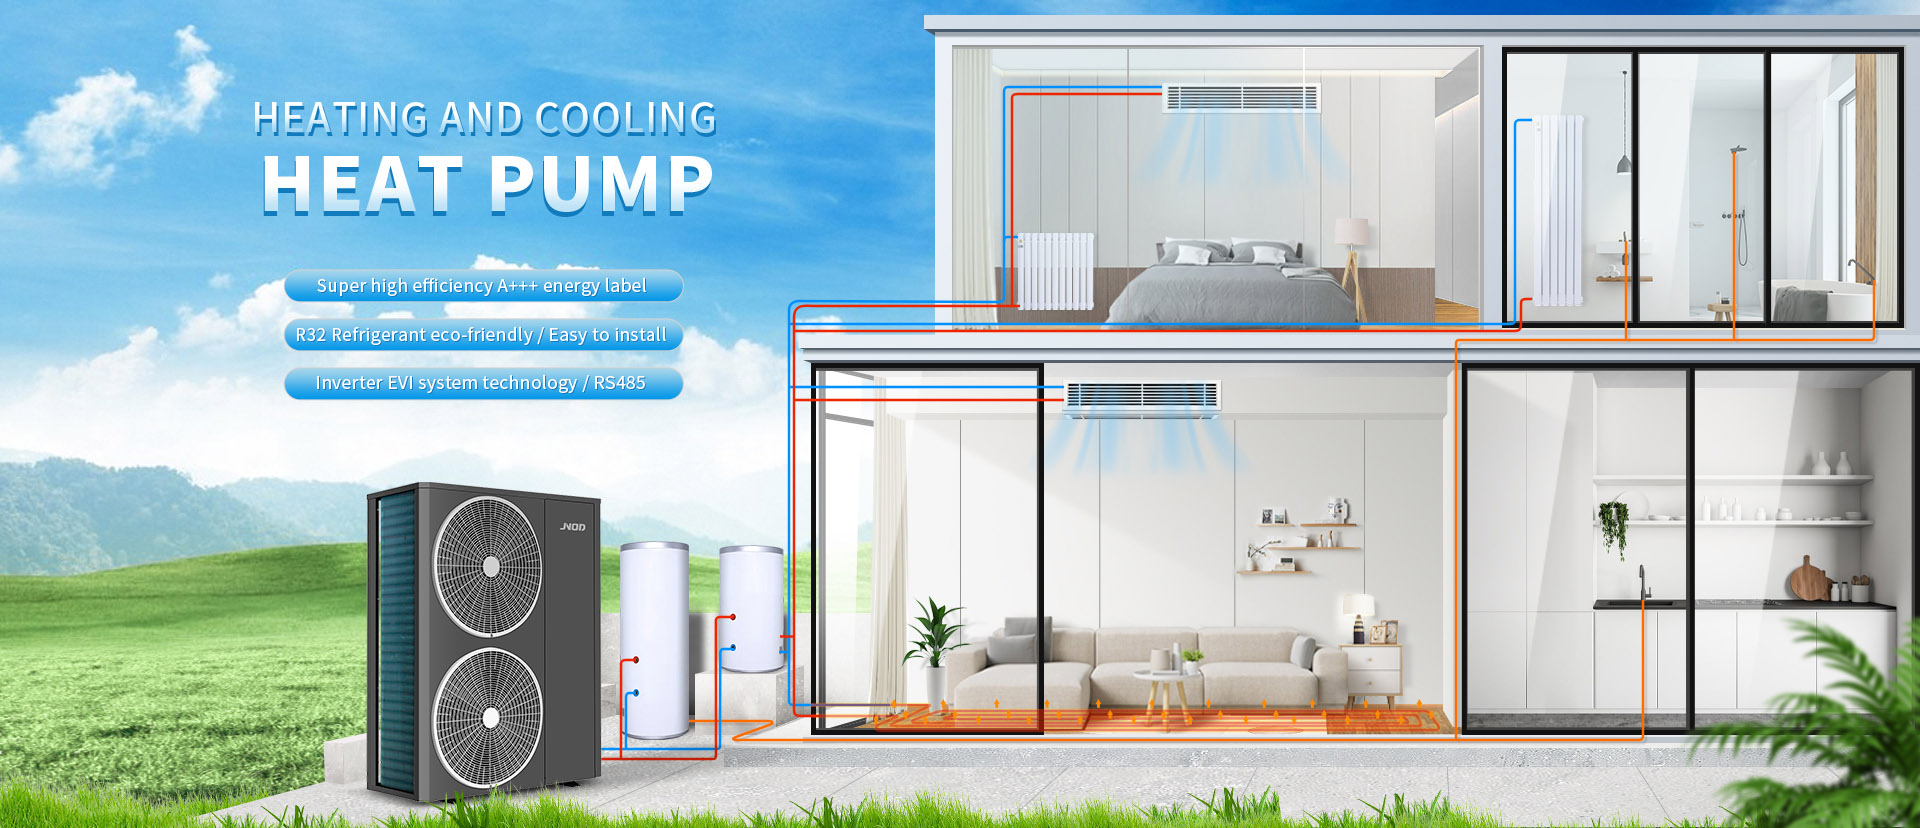 Simultaneous Heating And Cooling Heat Pump